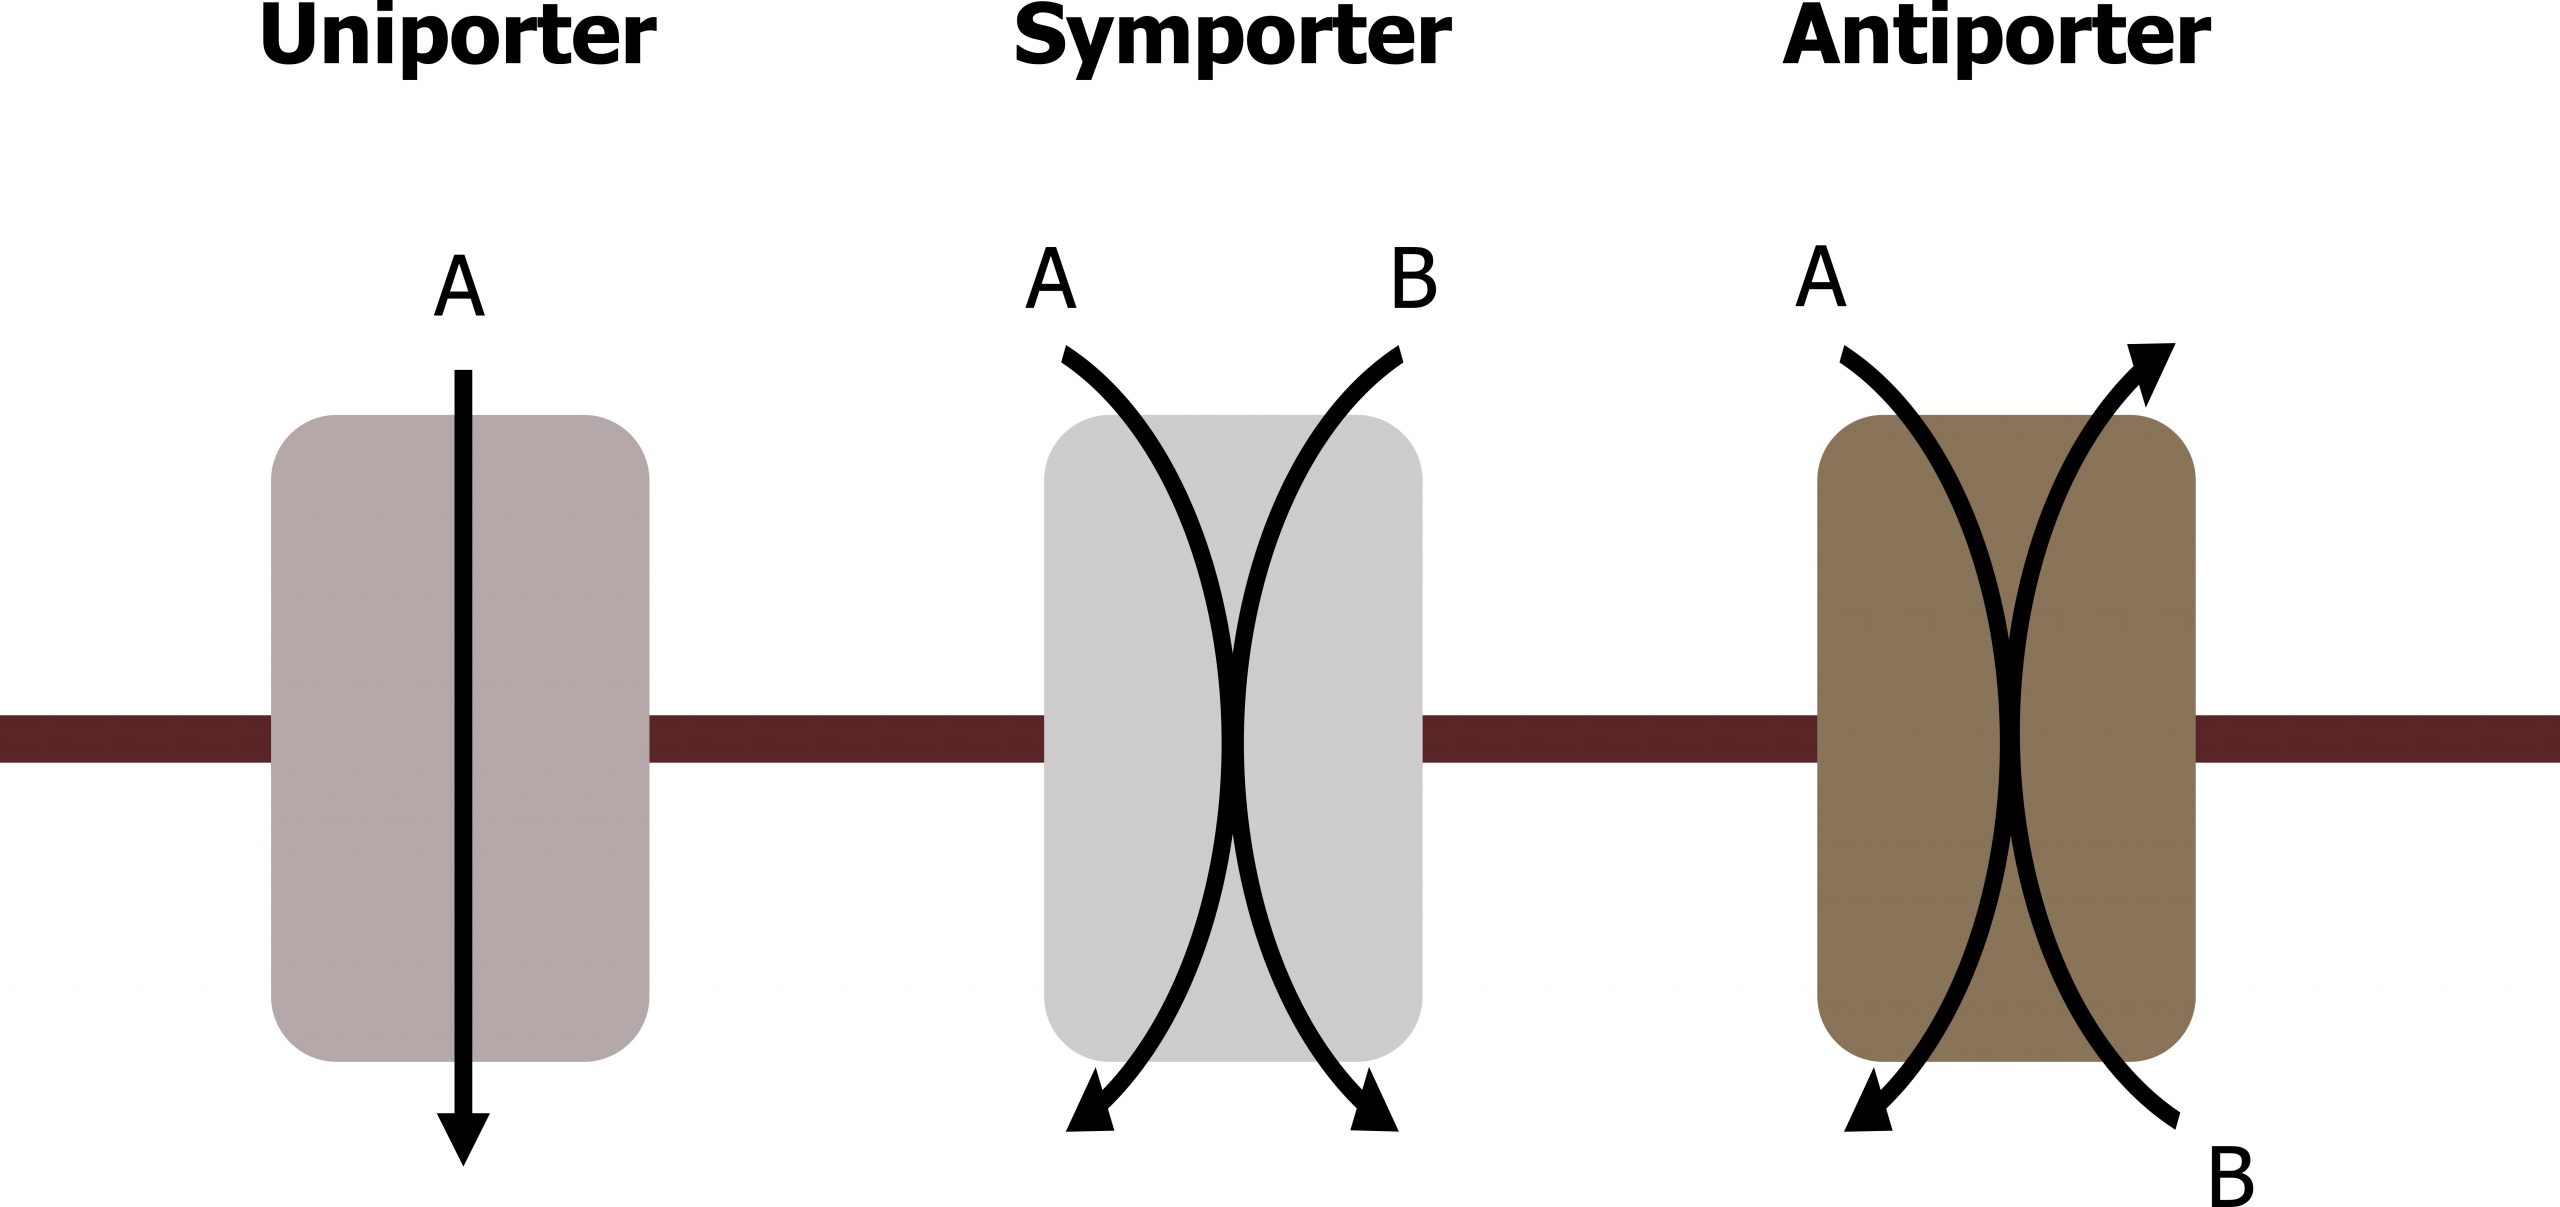 Uniporter: A moves in one direction. Symporter: A and B move in the same direction. Antiporter: A and B move in opposite directions.